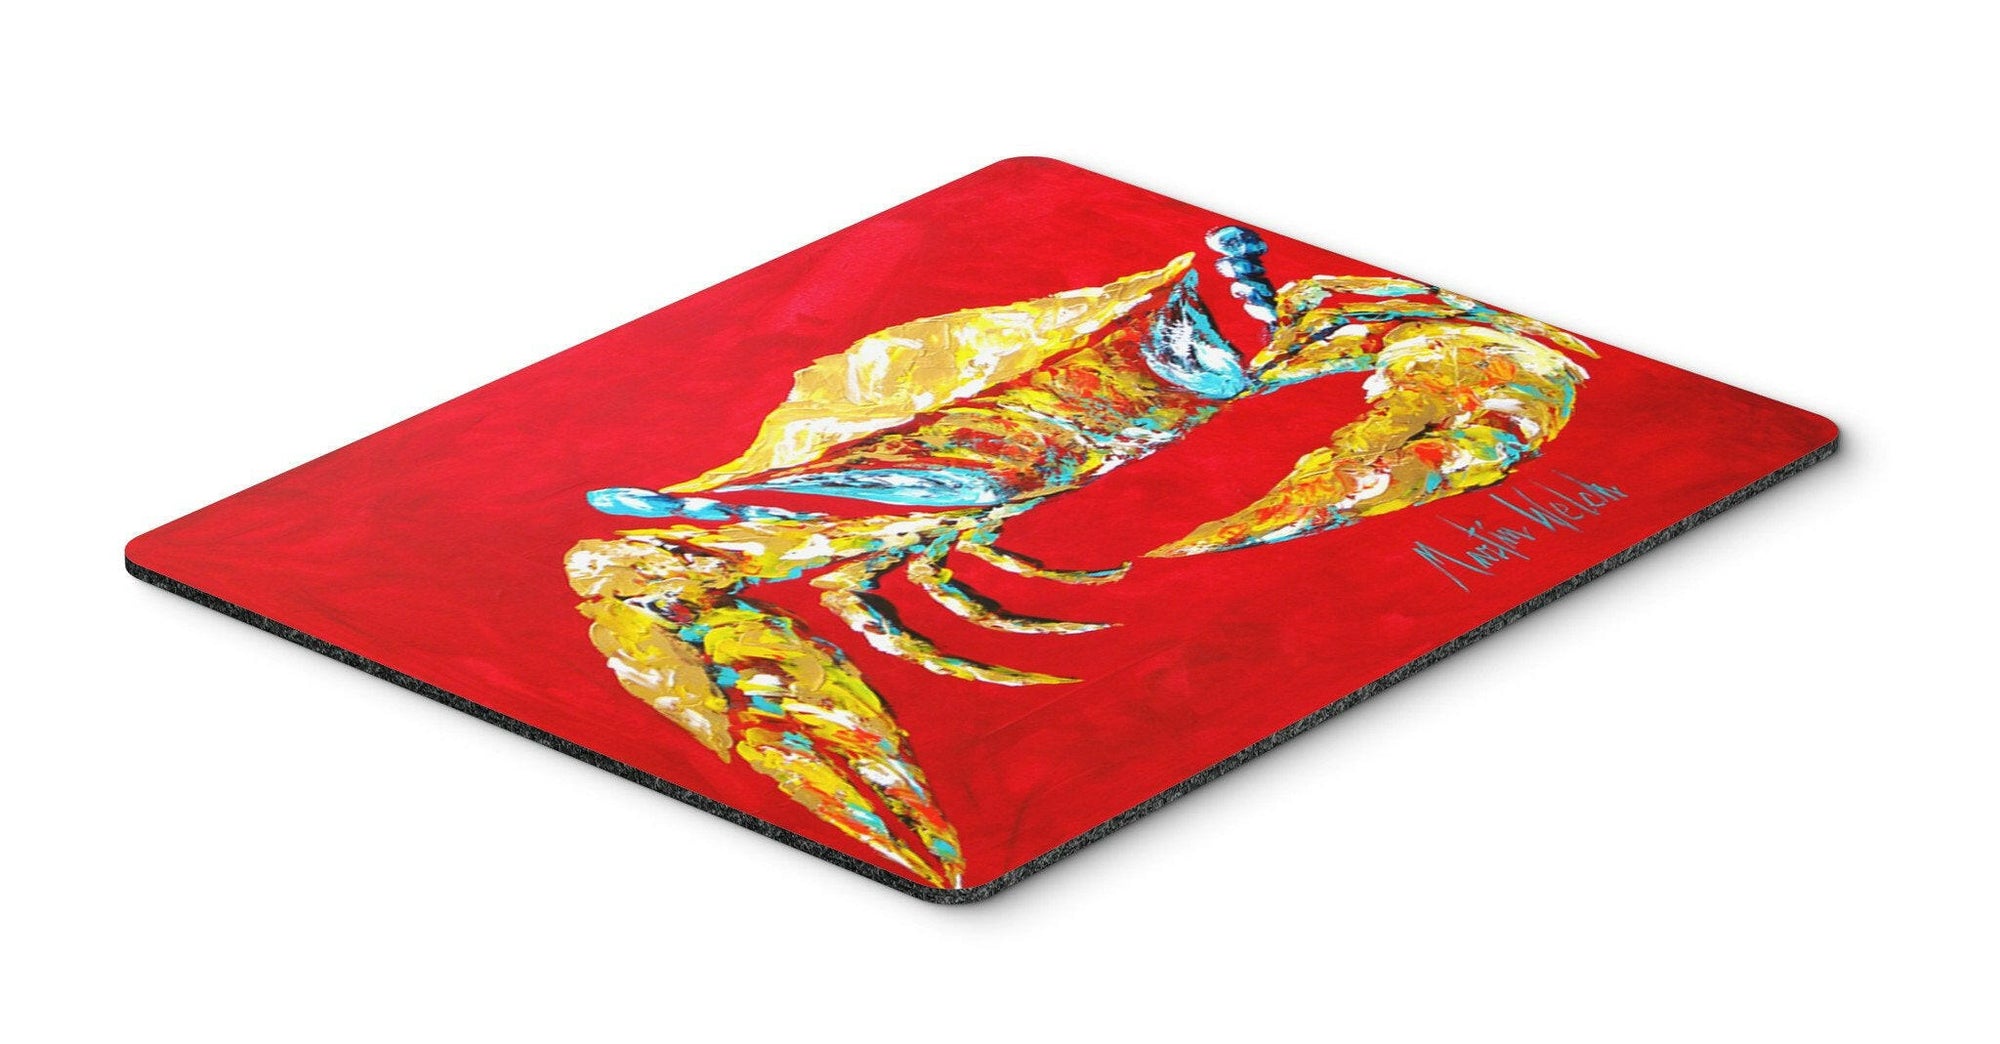 Crab Blue on Red, Sr. Mouse Pad, Hot Pad or Trivet by Caroline's Treasures